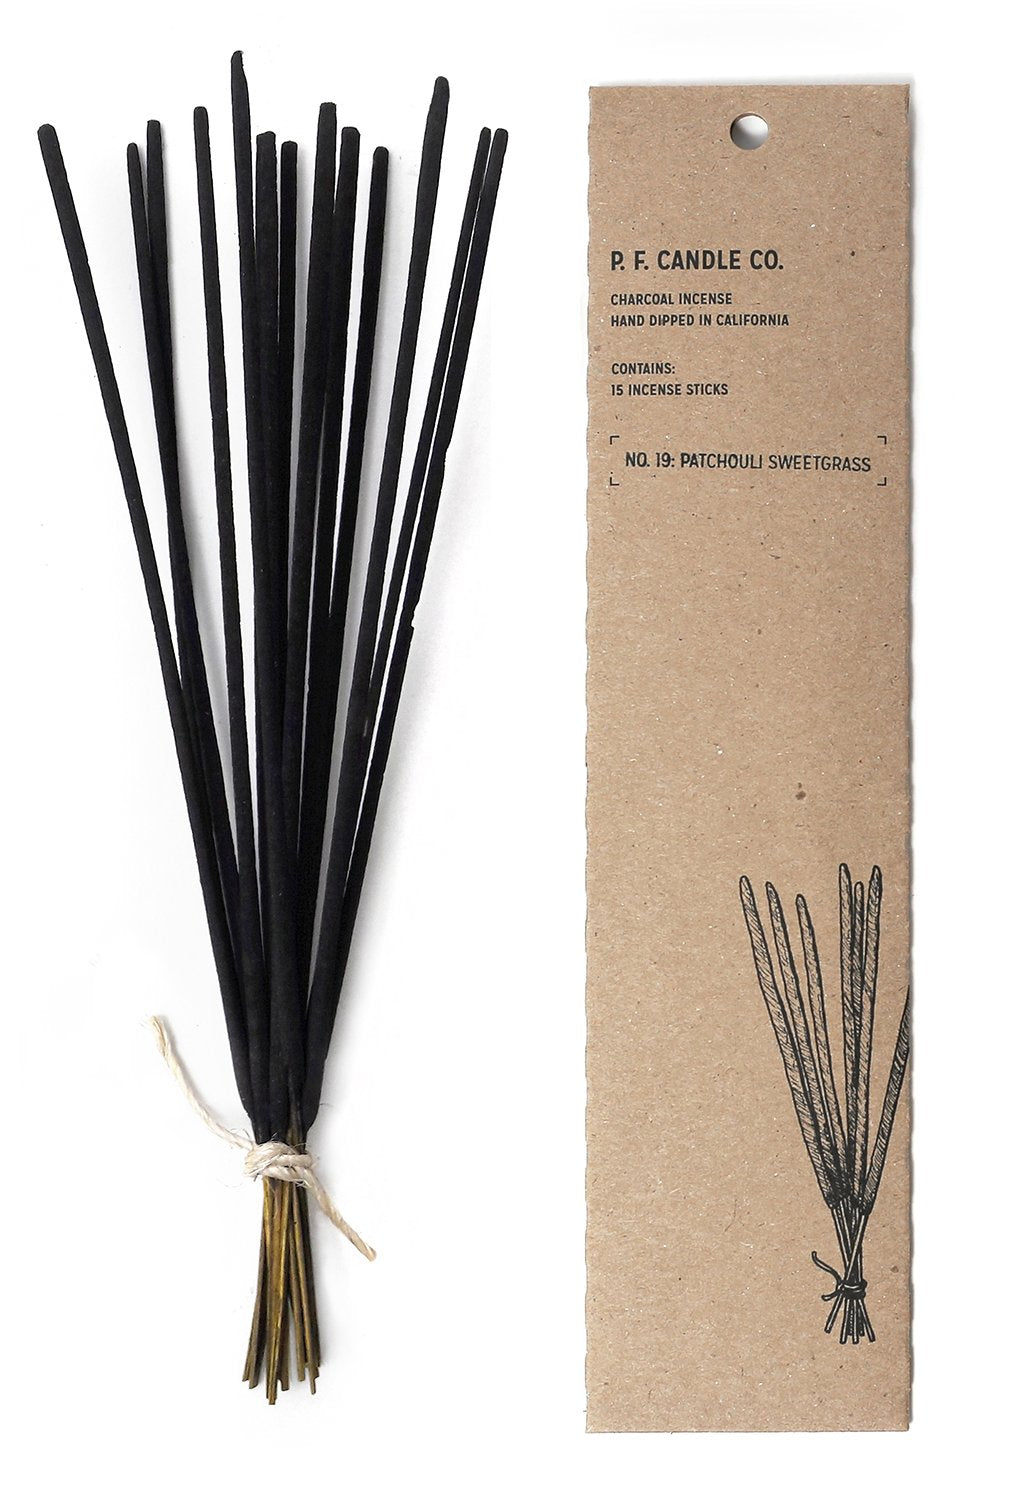 INCENSE by P.F. CANDLE CO.